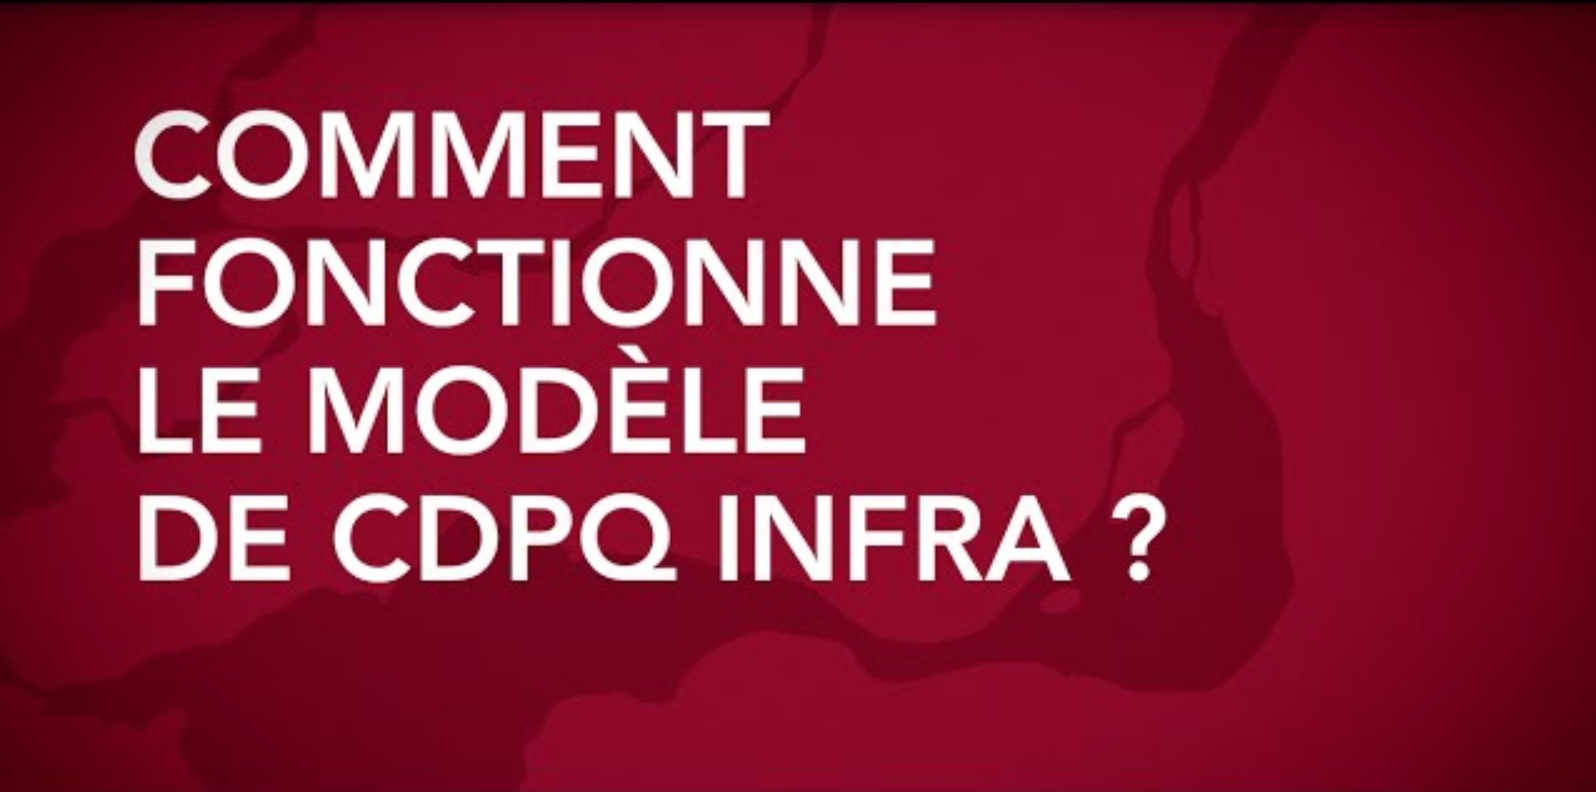 The CDPQ Infra model in 2 minutes